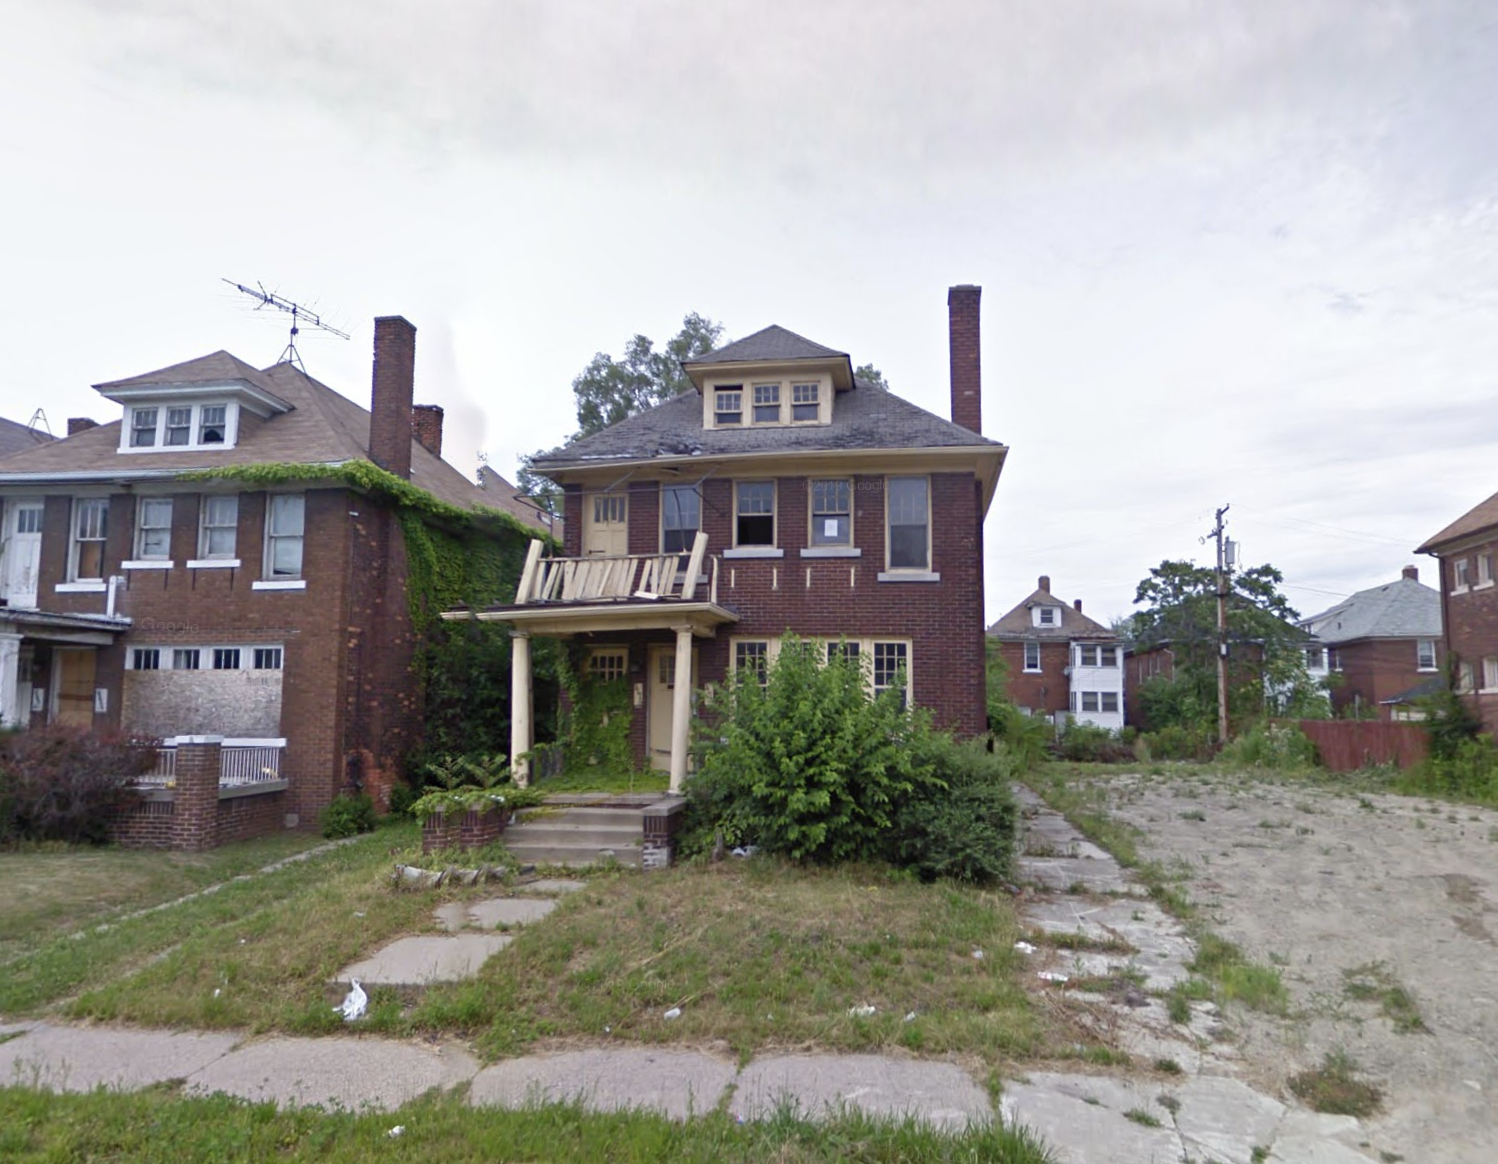 A two story brick home. There’s a large untended bush outside the front windows and a wobbly porch overhang. 